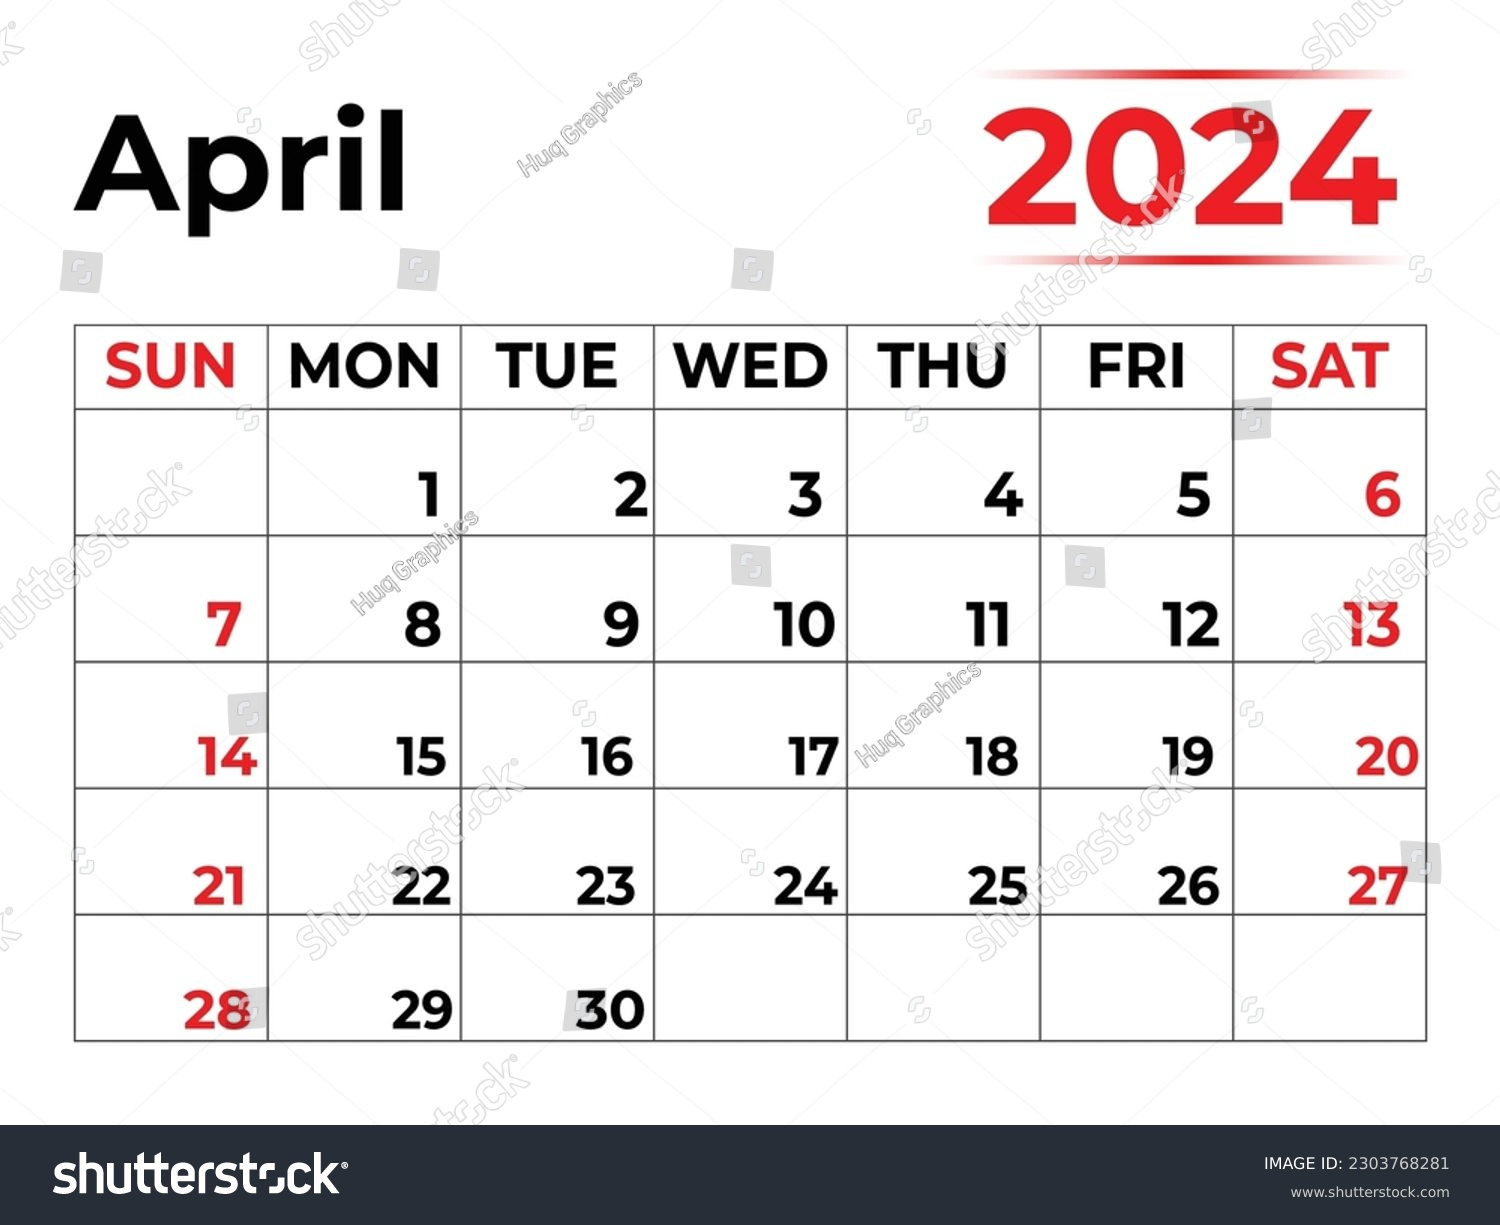 April 2024 Monthly Calendar Design Clean Stock Vector (Royalty with April -May 2024 Calendar